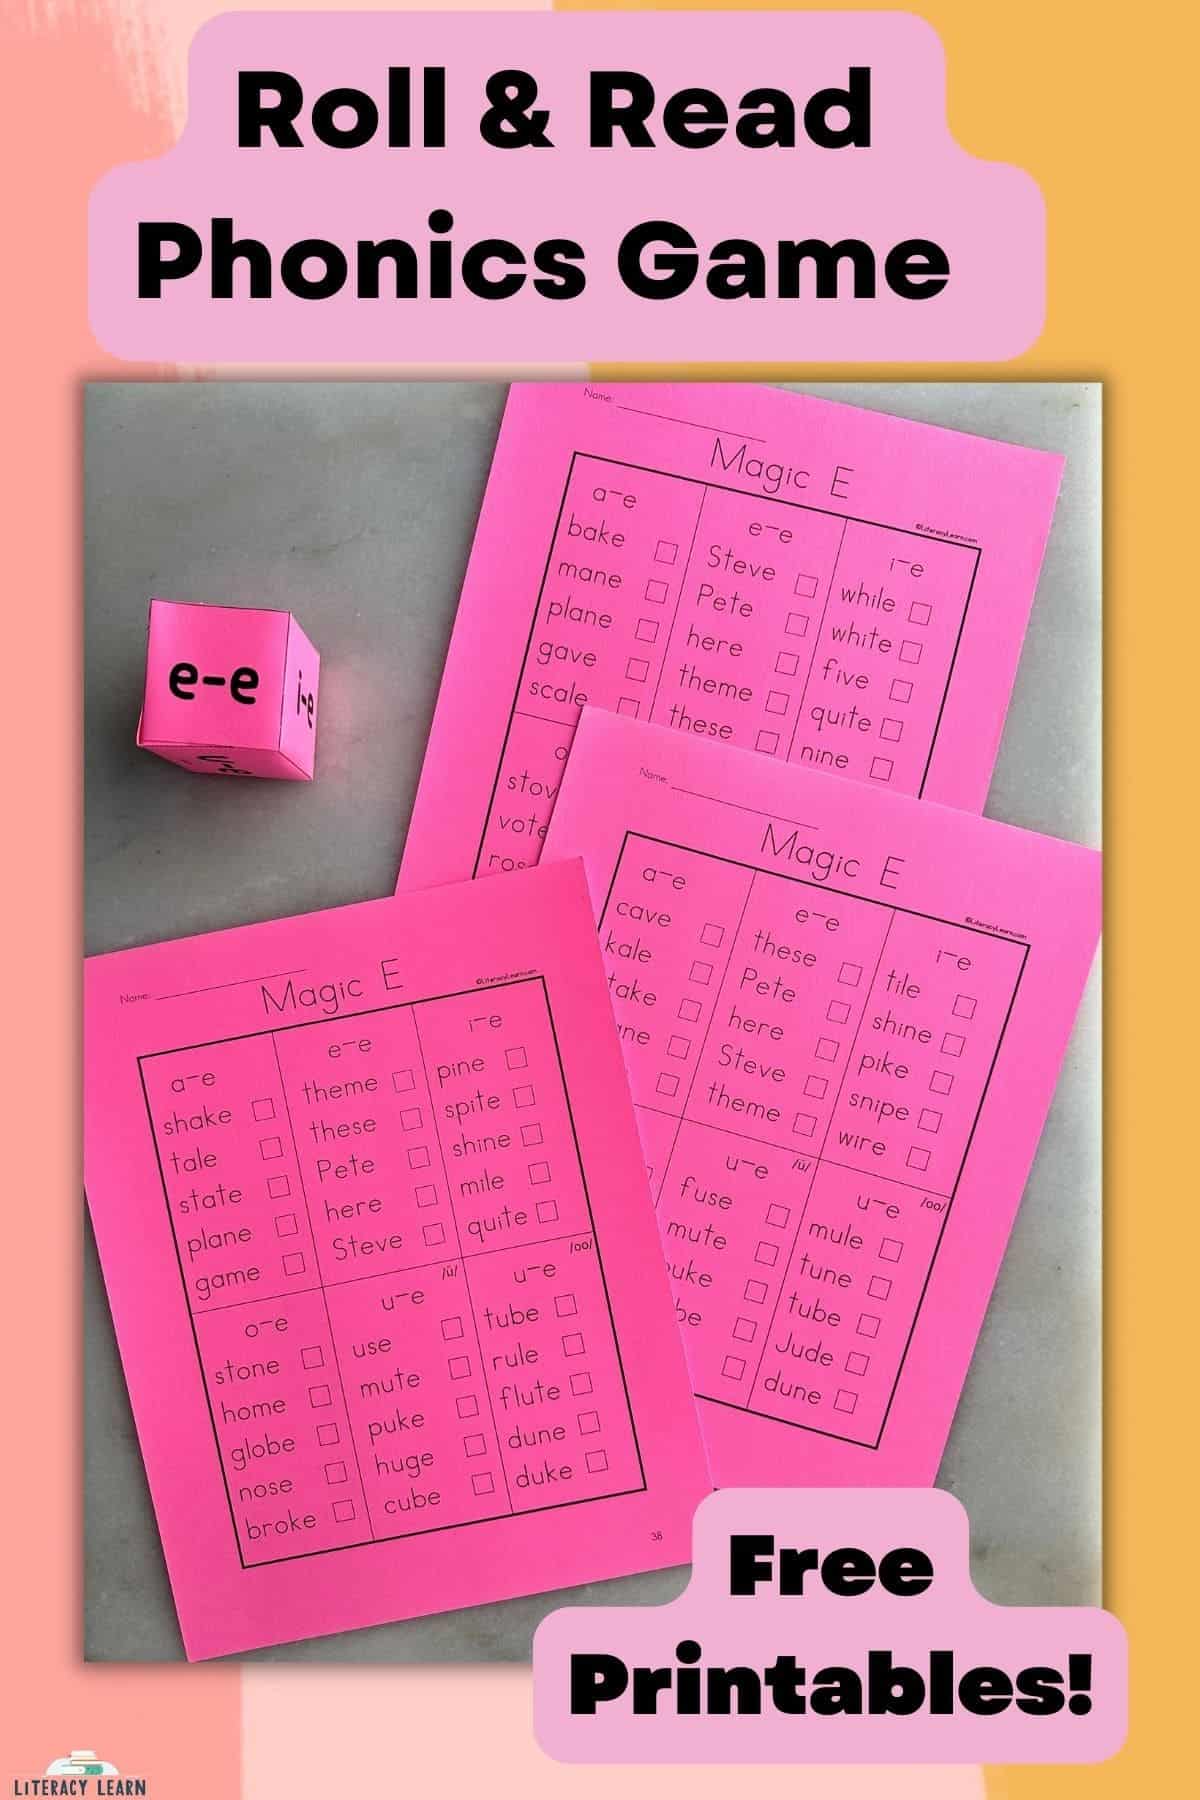 Pinterest image showing the silent E phonics dice and 3 worksheets with text "free printable."